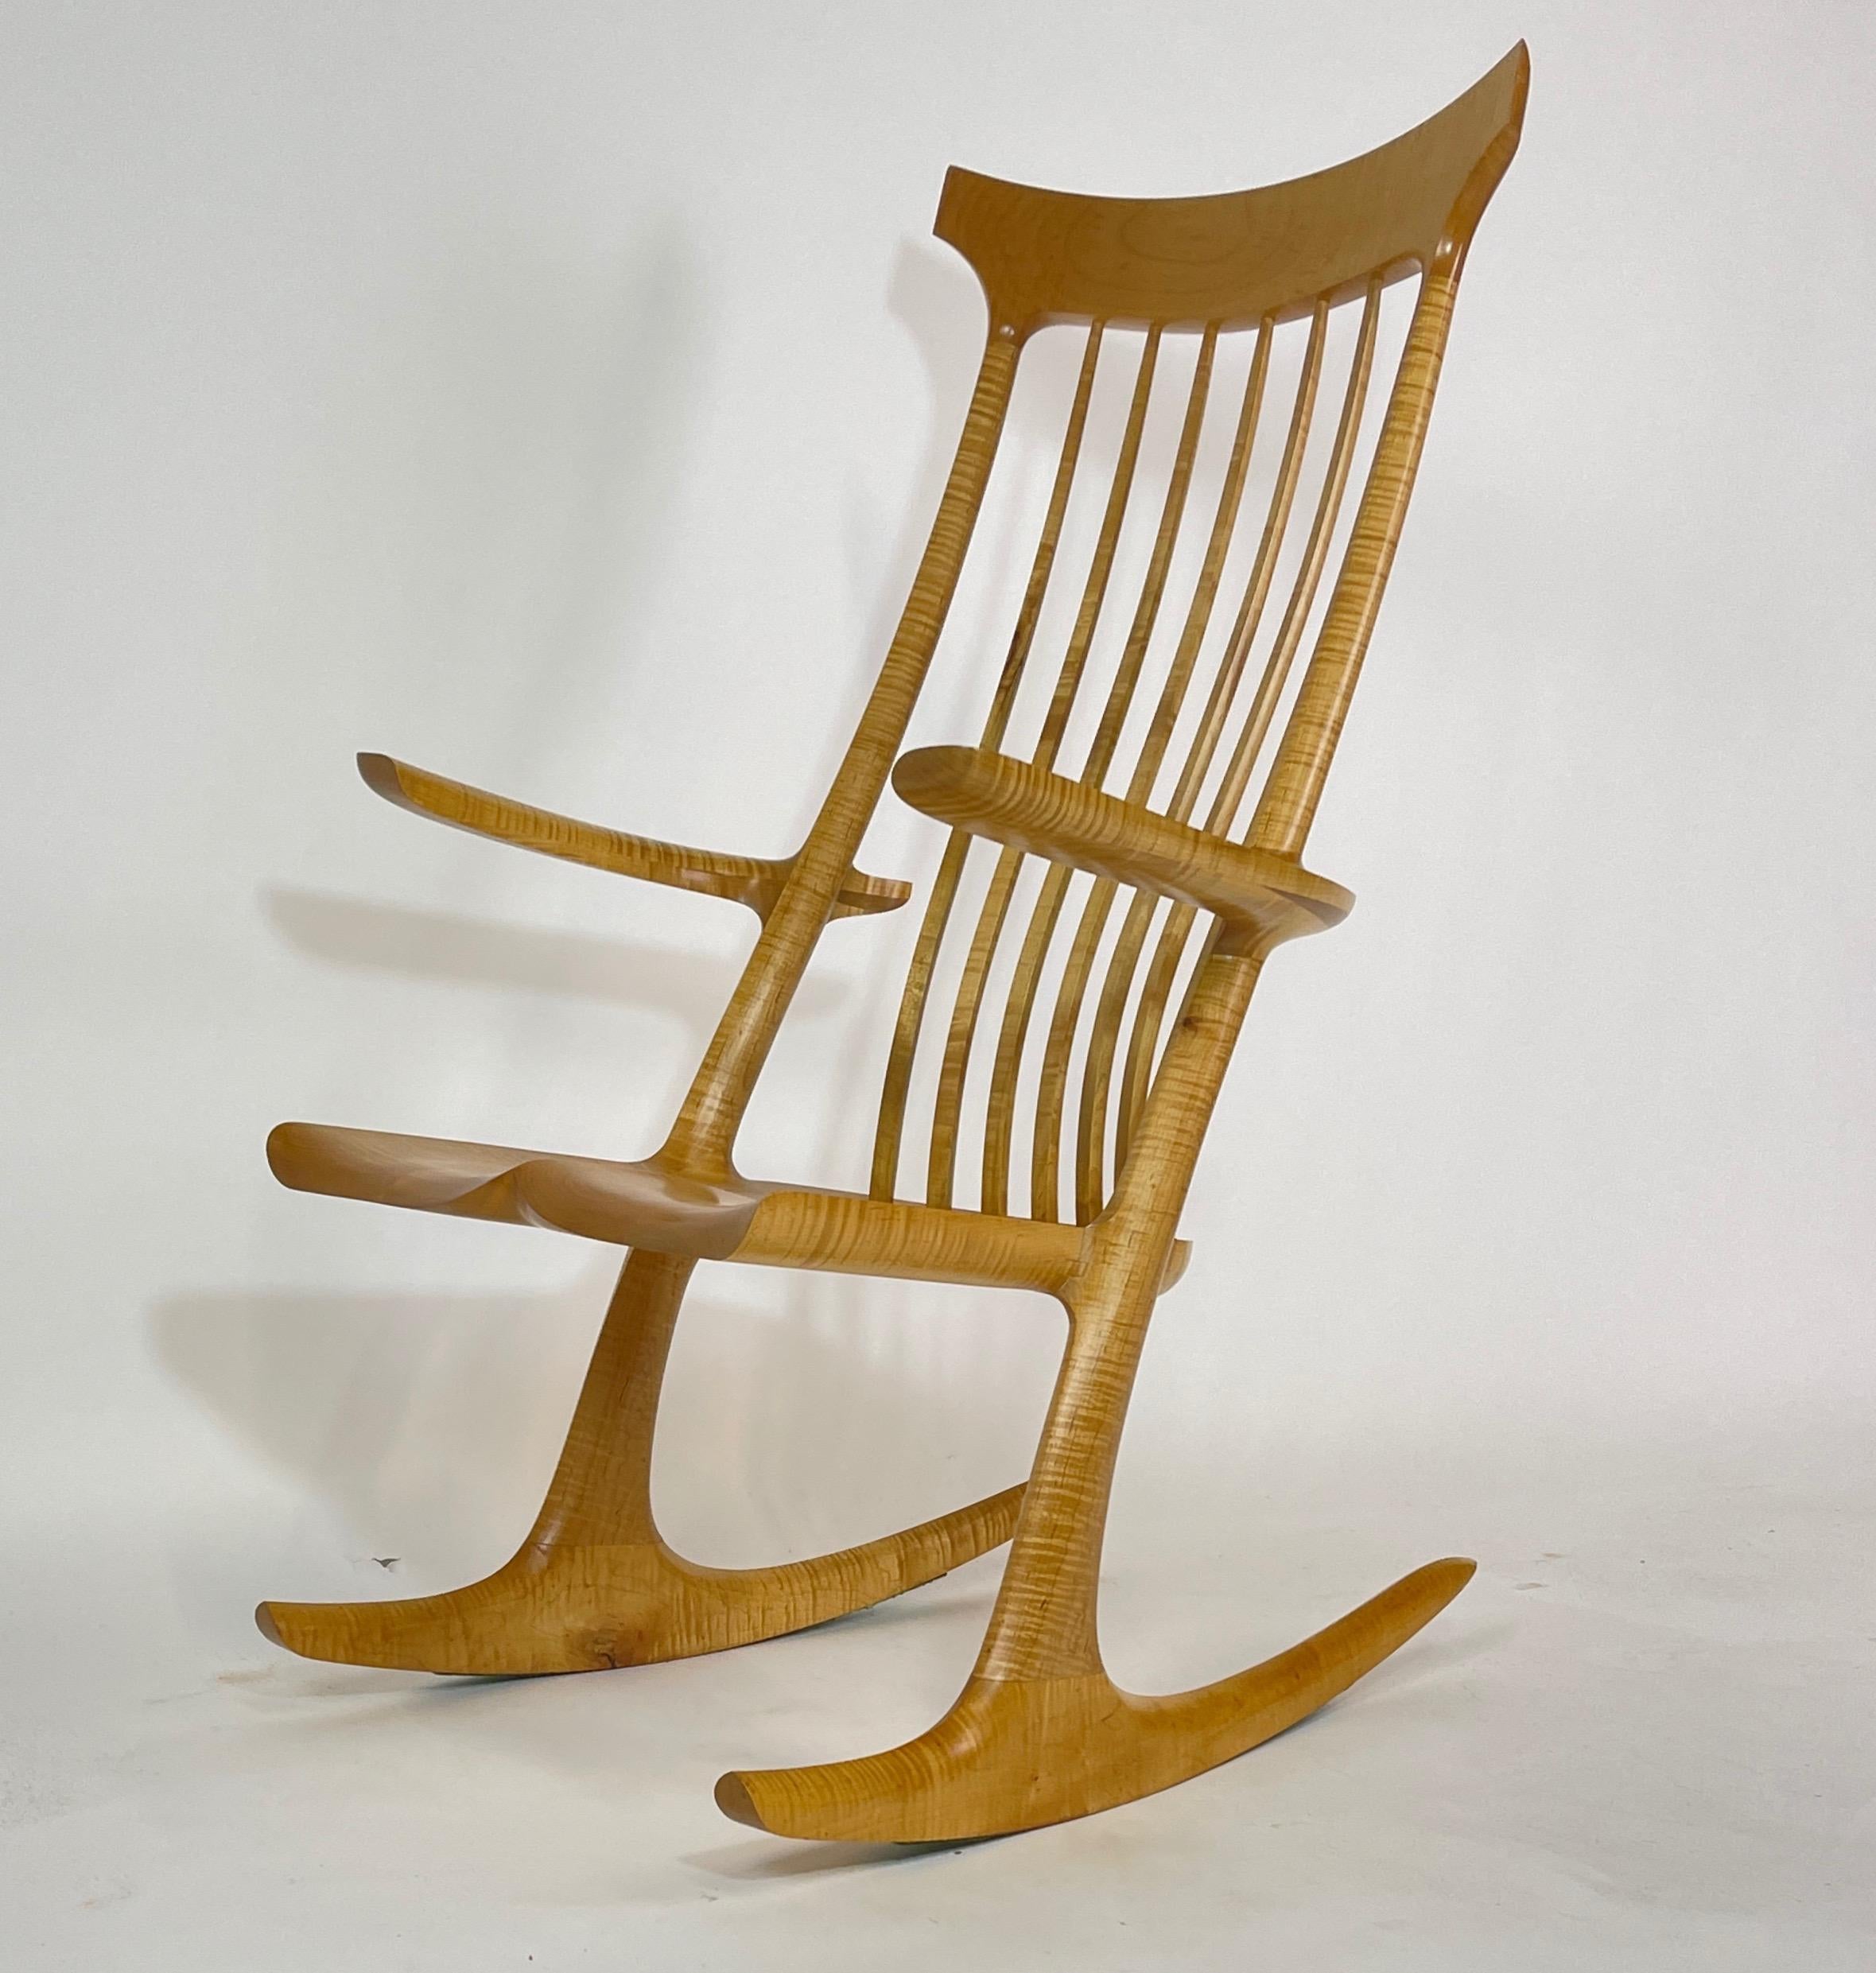 Sculptural Studio Handcrafted Rocker Rocking Chair in Curly Maple 9